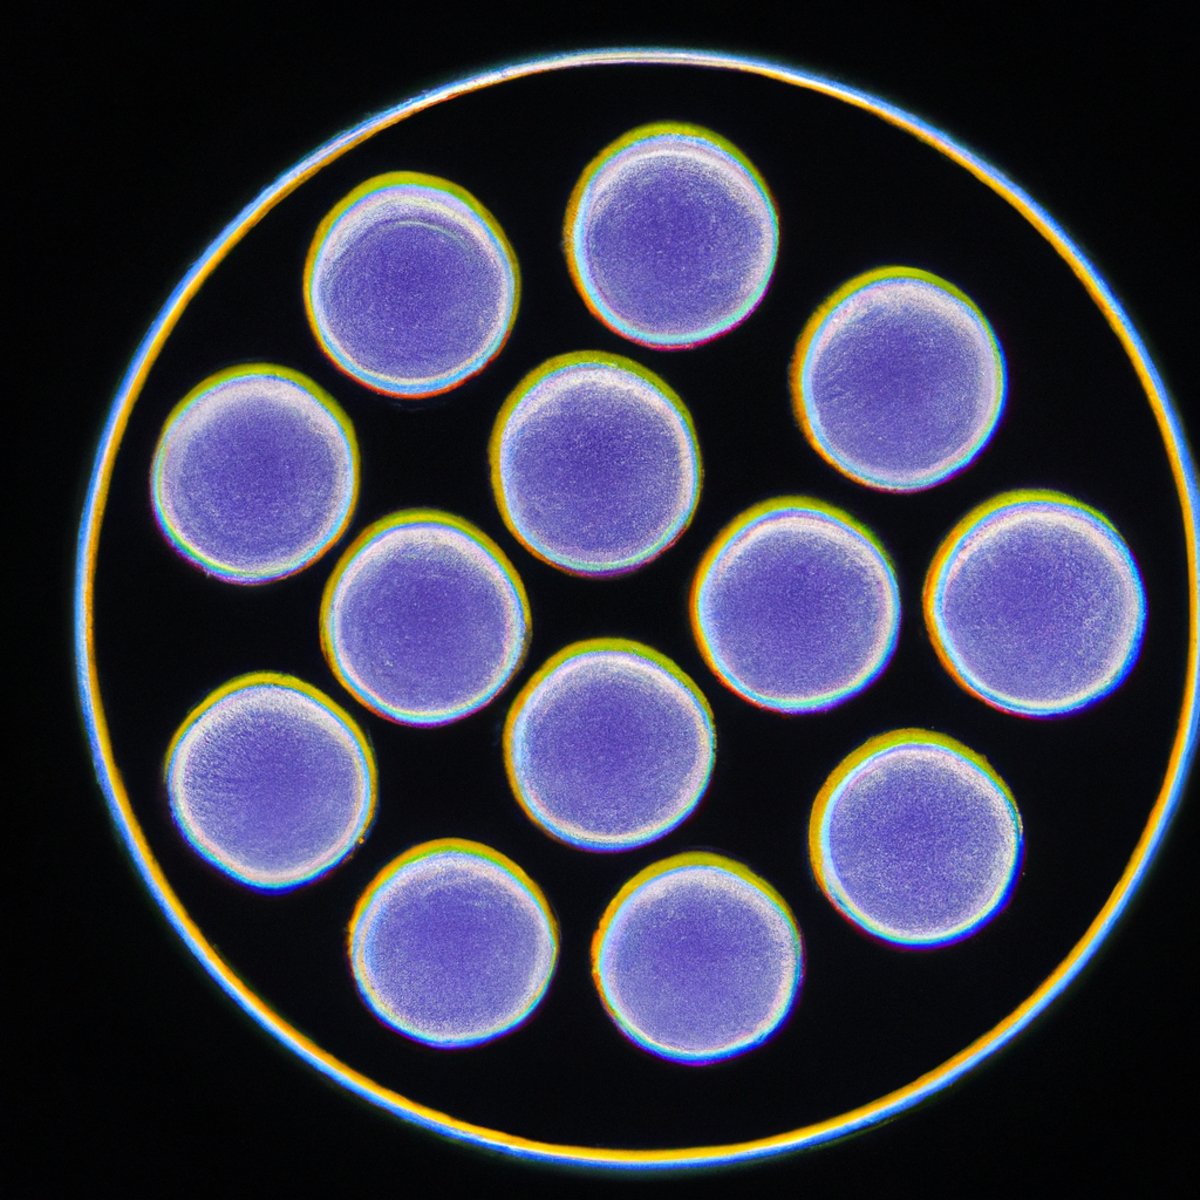 Close-up view of activated platelets on a microscope slide, showcasing their unique characteristics and vibrant mosaic-like pattern - Hermansky-Pudlak Syndrome